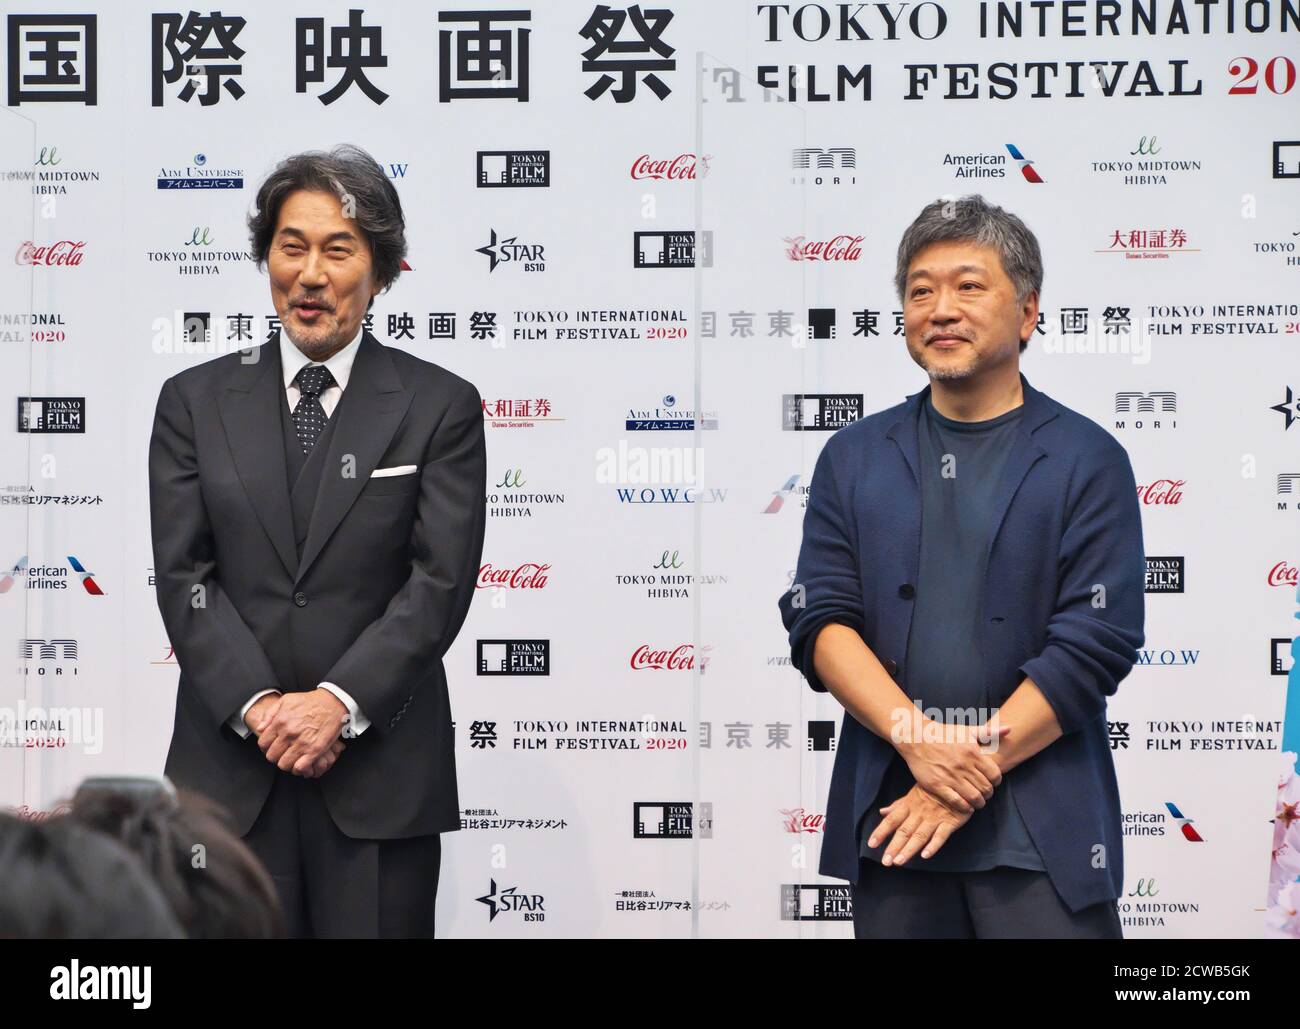 Actor Koji Yakusho(L) and director Hirokazu Kore-eda attend the press conference for the Tokyo International Film Festival 2020 in Tokyo, Japan on Tuesday, September 29, 2020. This year's Tokyo festival is held on October 31st to November 9th collaborate with Tokyo Filmex. 25 films are world premieres, and the remaining seven films Asian premieres in this event.     Photo by Keizo Mori/UPI Stock Photo